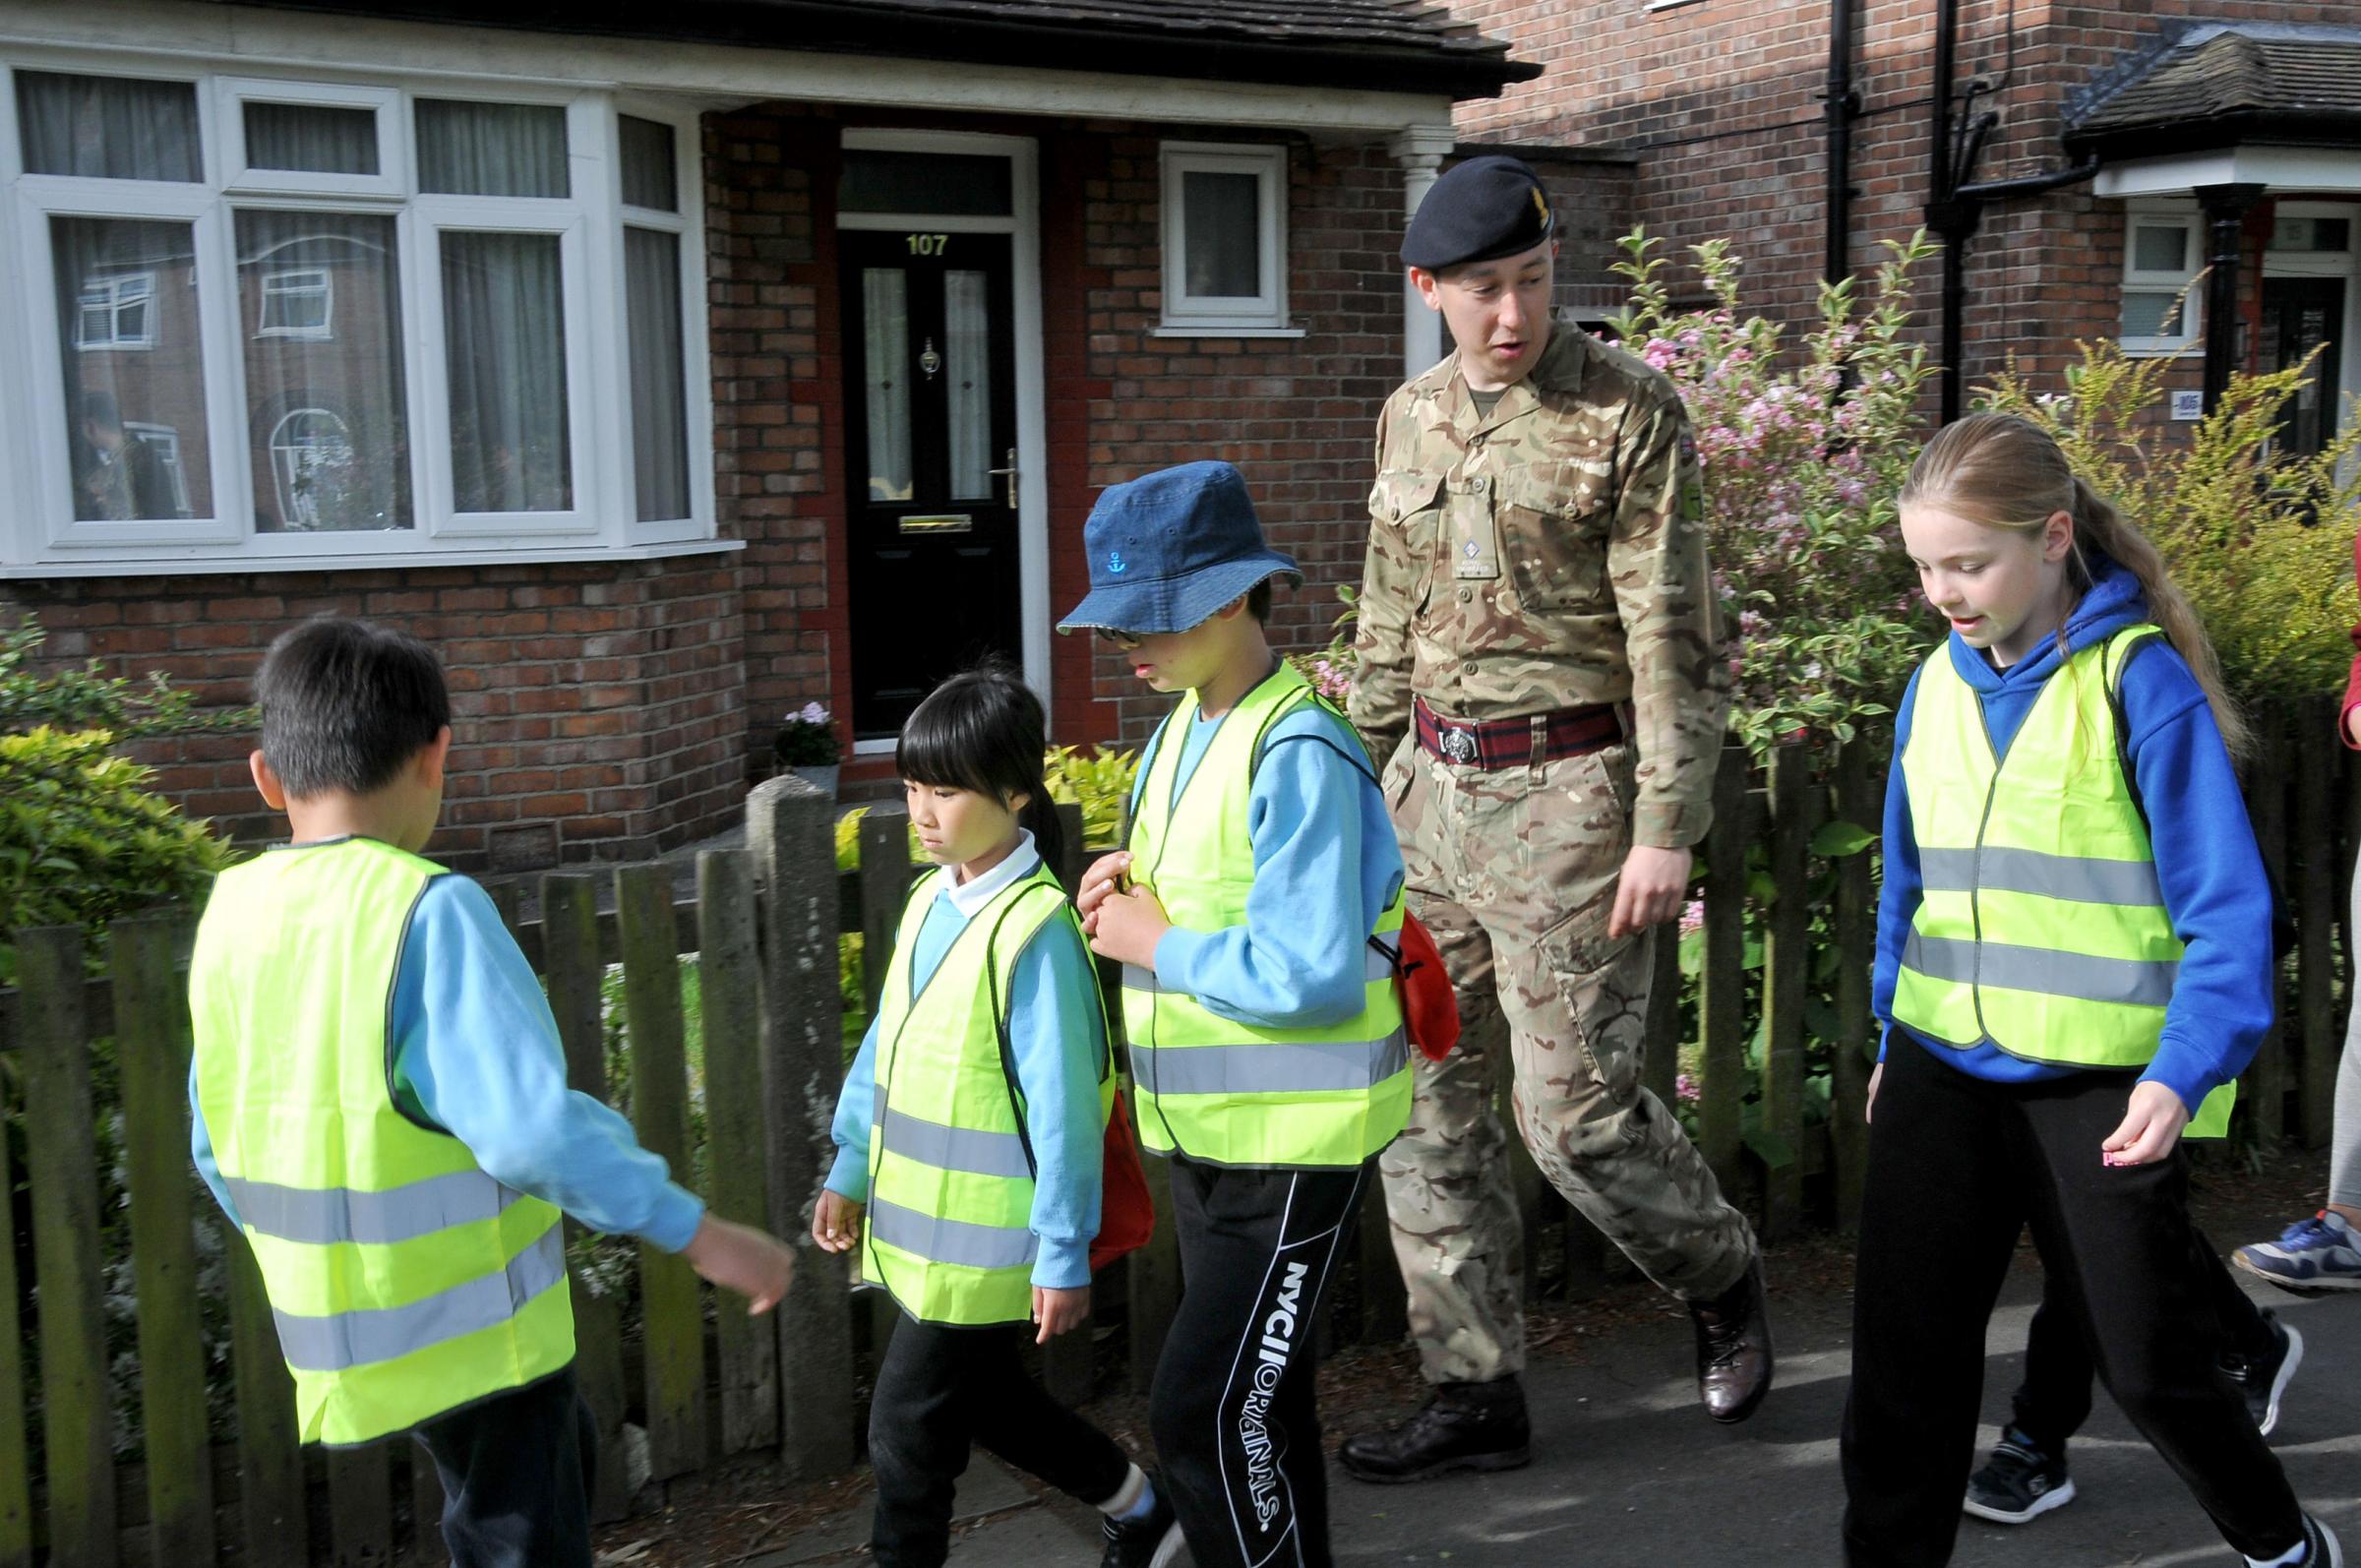 Children picked a hero to walk to school with